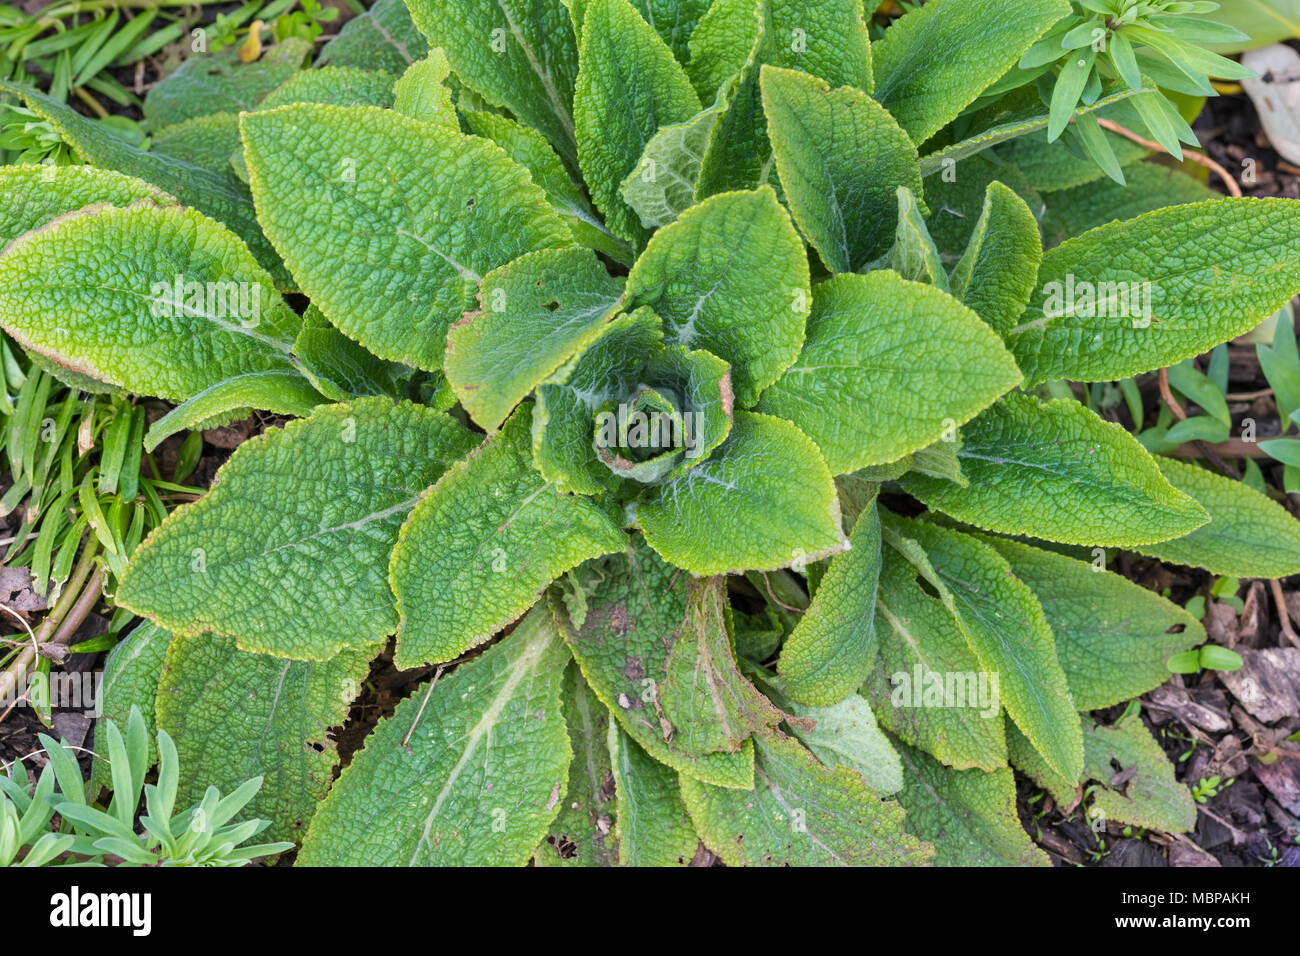 Top down view of leaves from the Digitalis purpurea (Purple Foxglove) plant, which are used to make the heart drug Digitalis. Growing in Spring, UK. Stock Photo